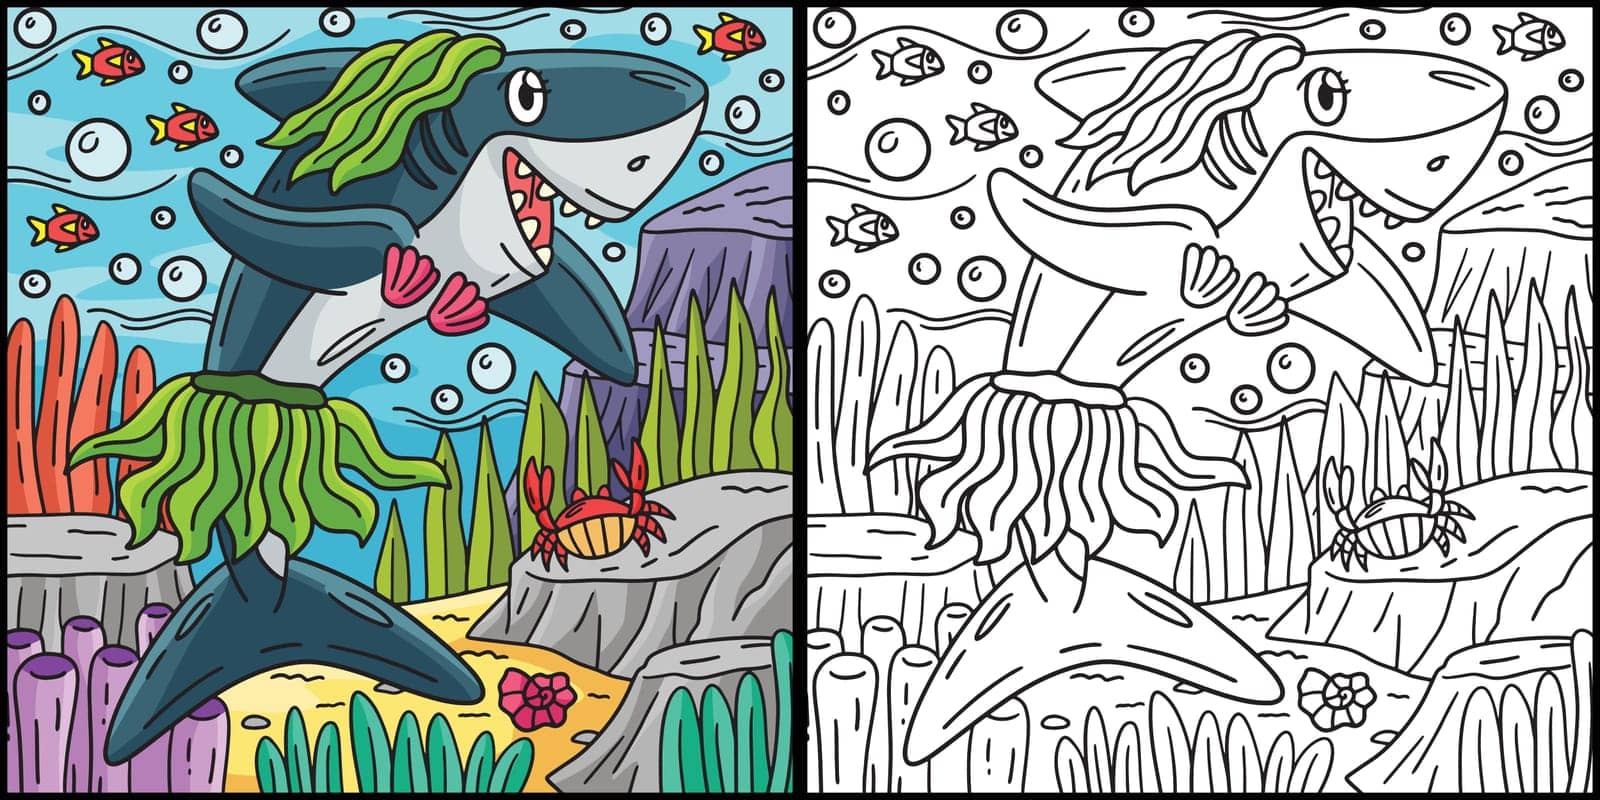 This coloring page shows a Shark and Seaweed. One side of this illustration is colored and serves as an inspiration for children.